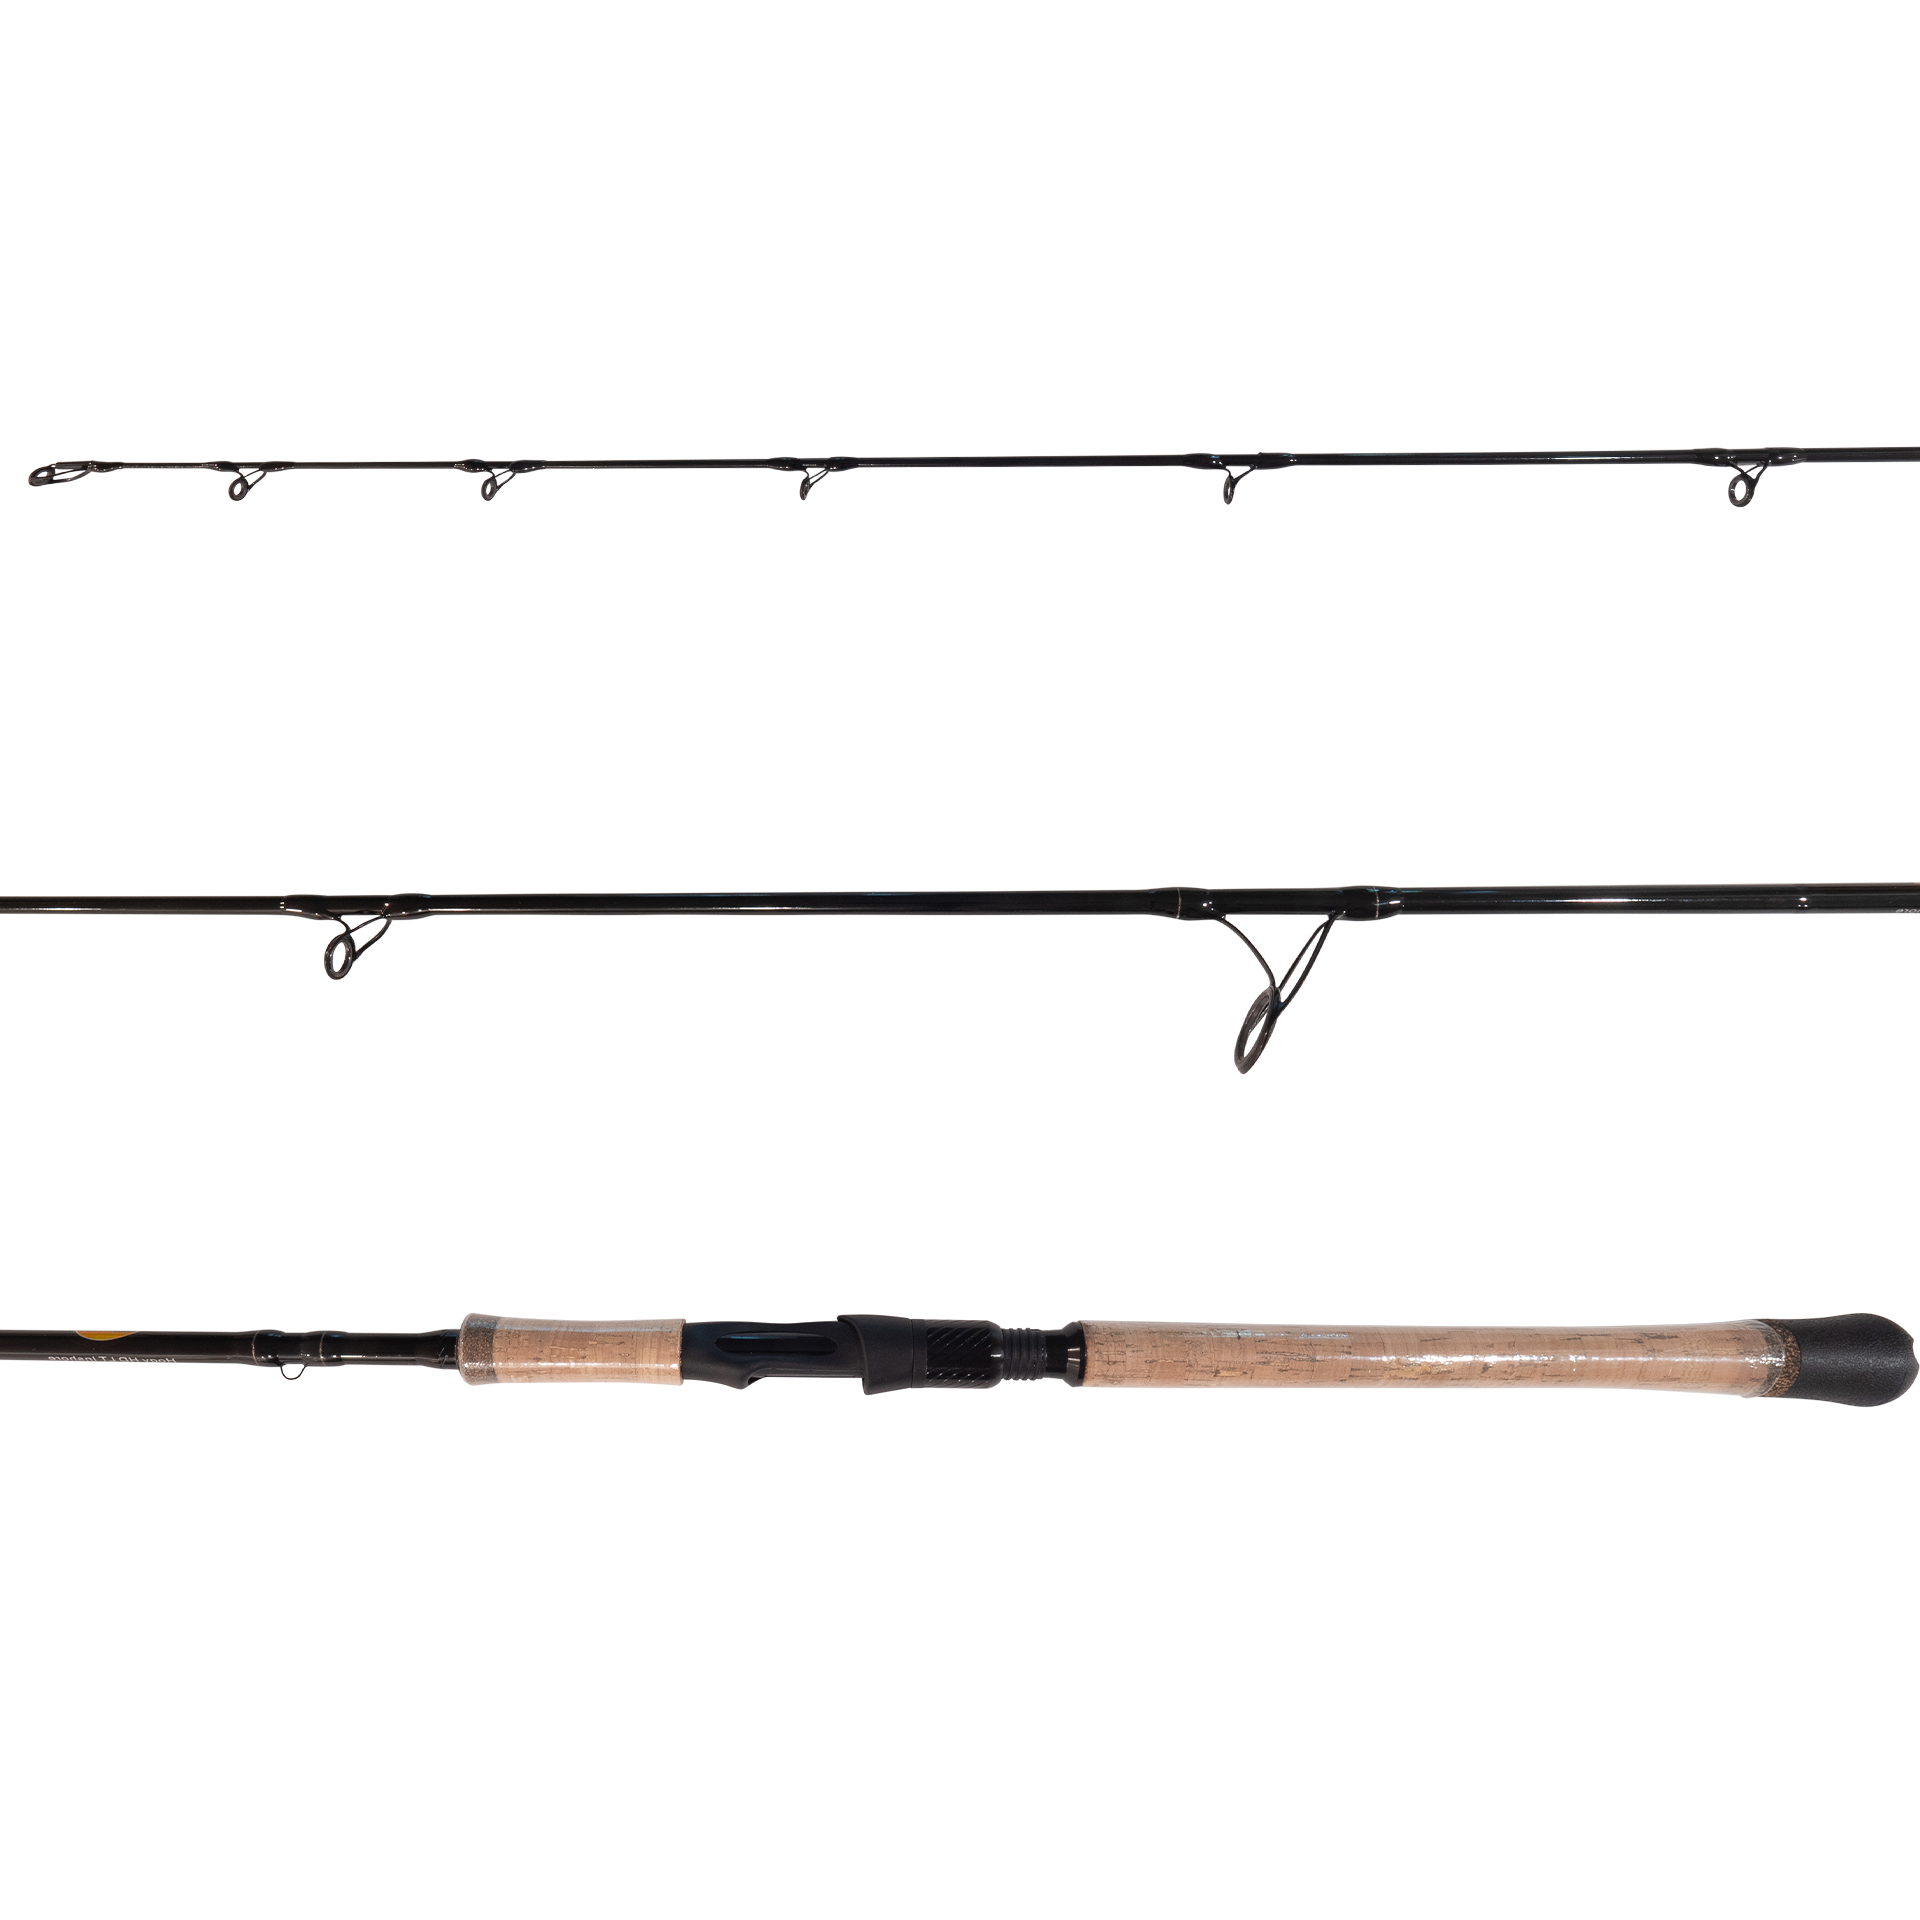 Inshore Spinning Rod: Mod-Fast Action 7' MH (3/4oz - 2oz)